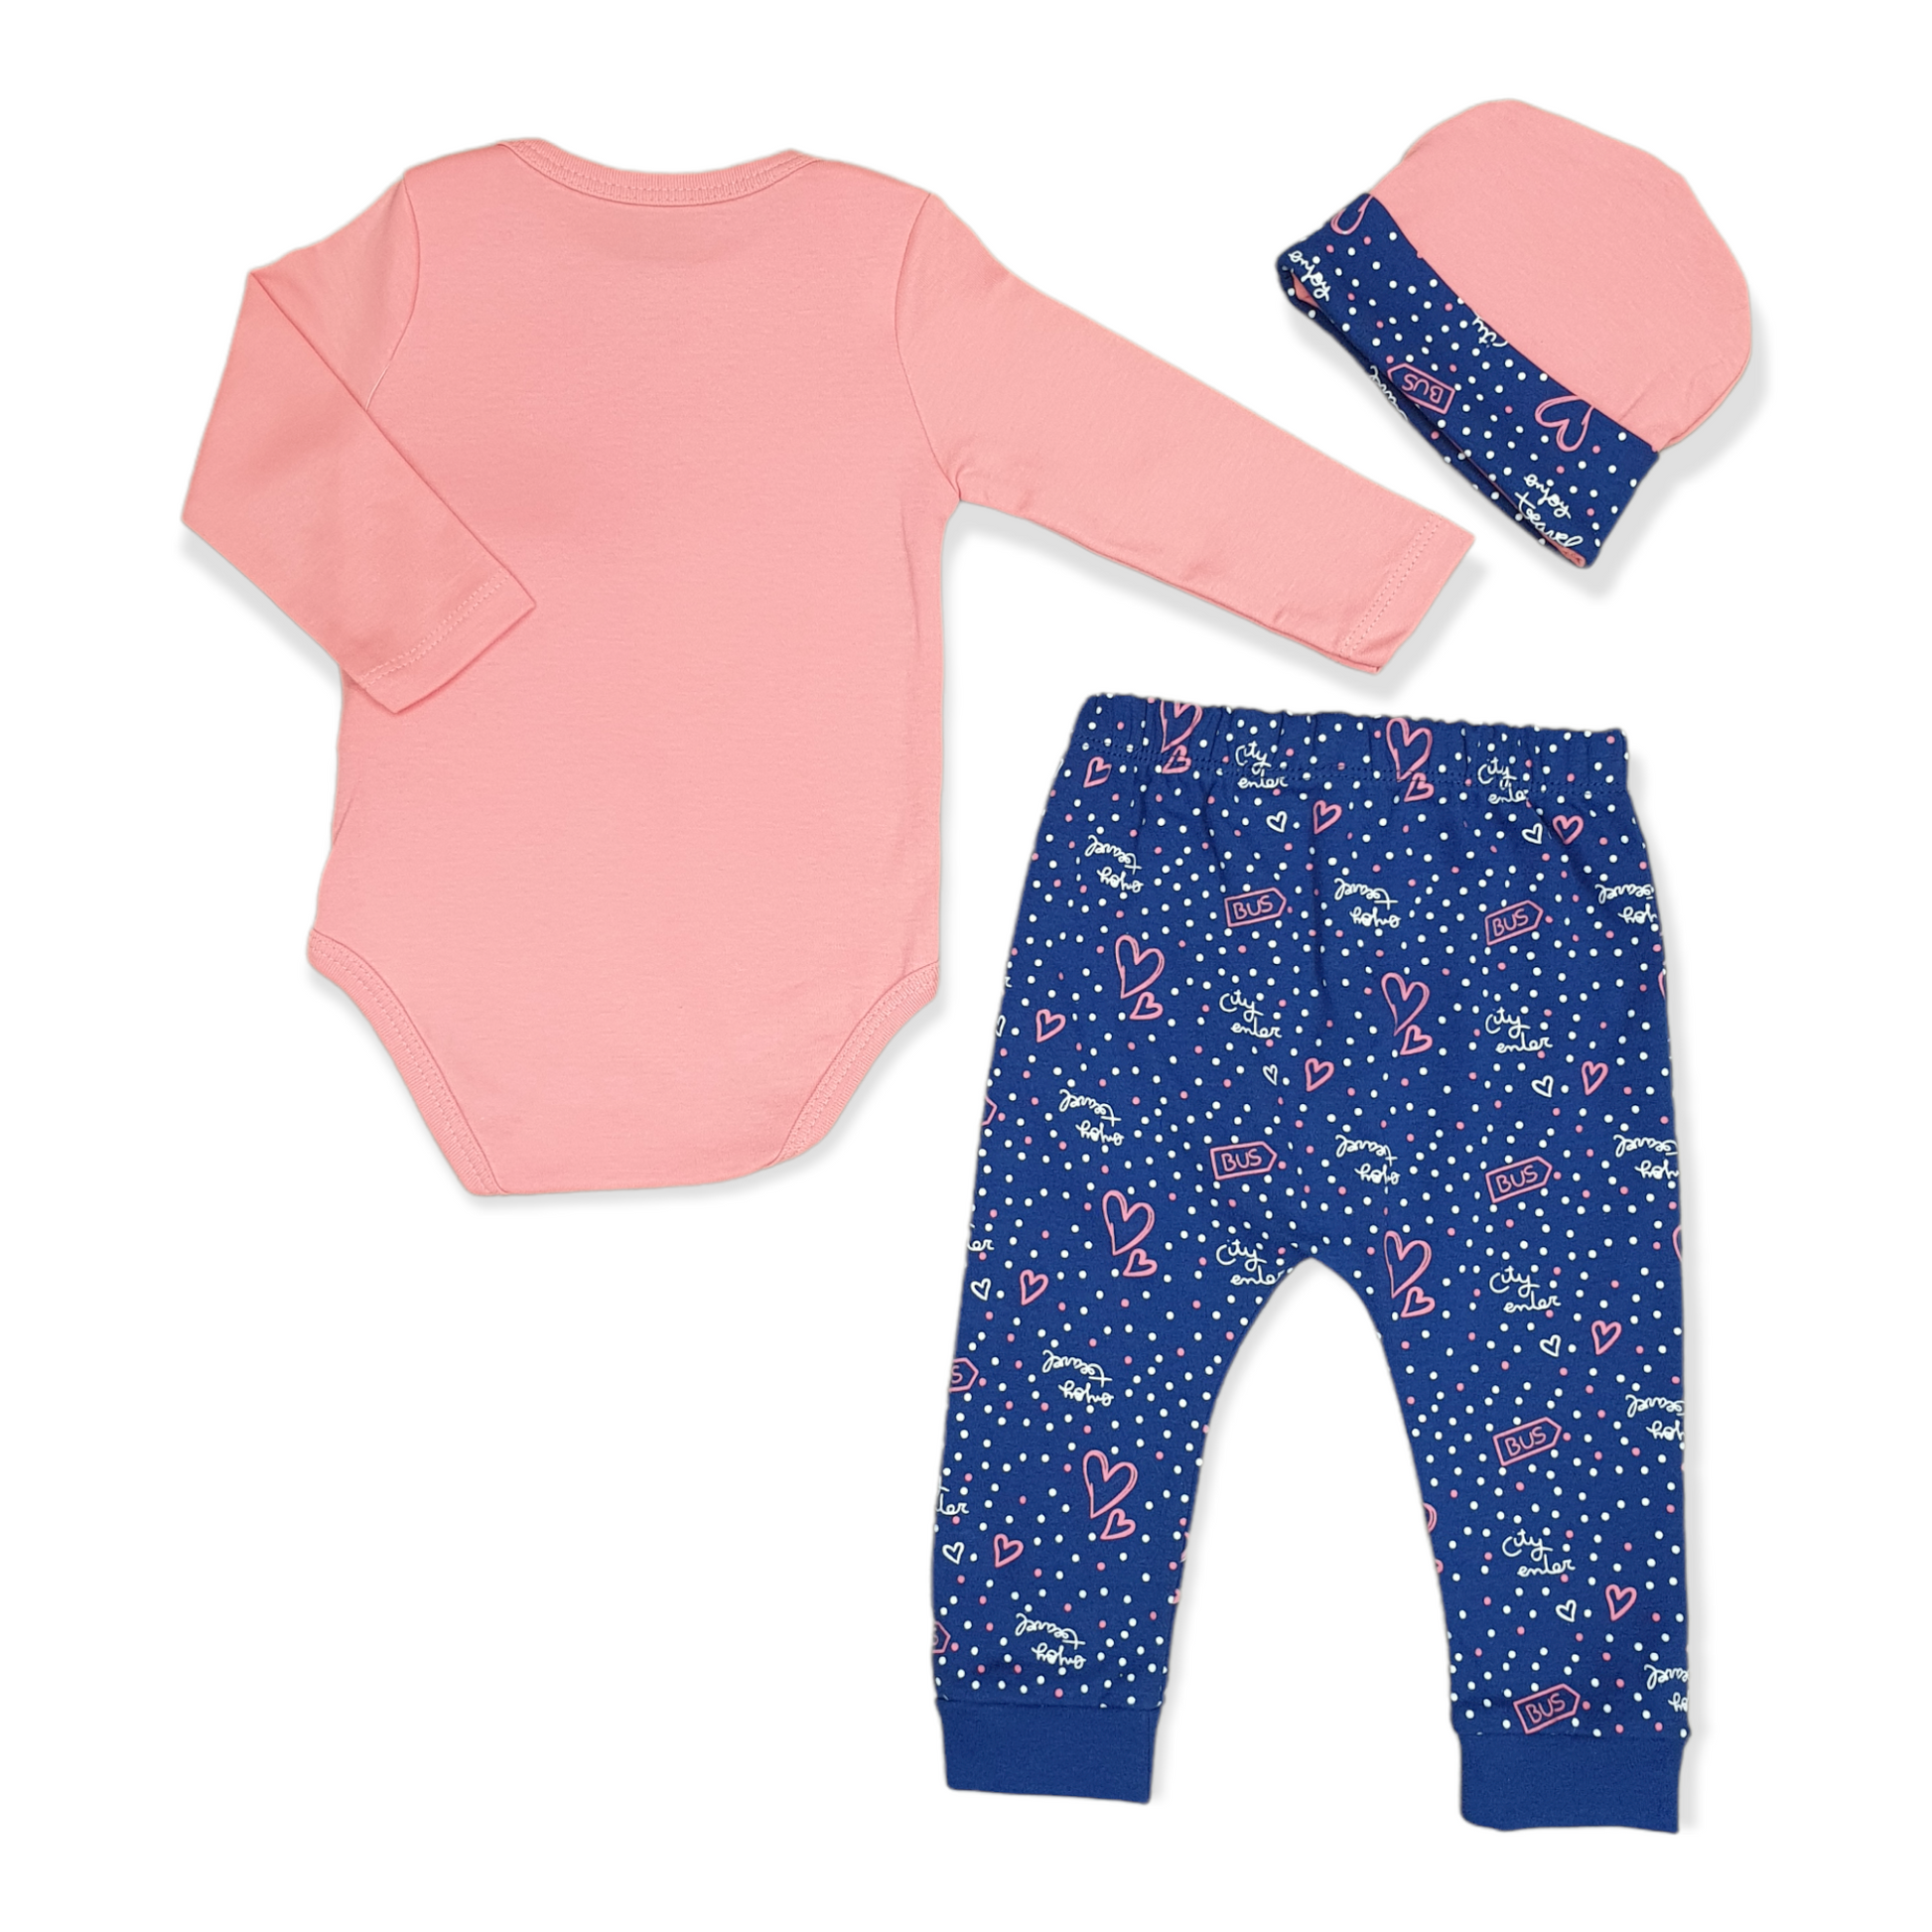 Feel Good Baby Girl Body with Pants and Cap-Blue, Body, Bodysuit, Cap, Cat, catgirl, catset3pcs, Creeper, Ears, Face, Feel, Footless, Girl, Good, Hat, Long Sleeve, Onesie, Pants, Pink-Miniworld-[Too Twee]-[Tootwee]-[baby]-[newborn]-[clothes]-[essentials]-[toys]-[Lebanon]